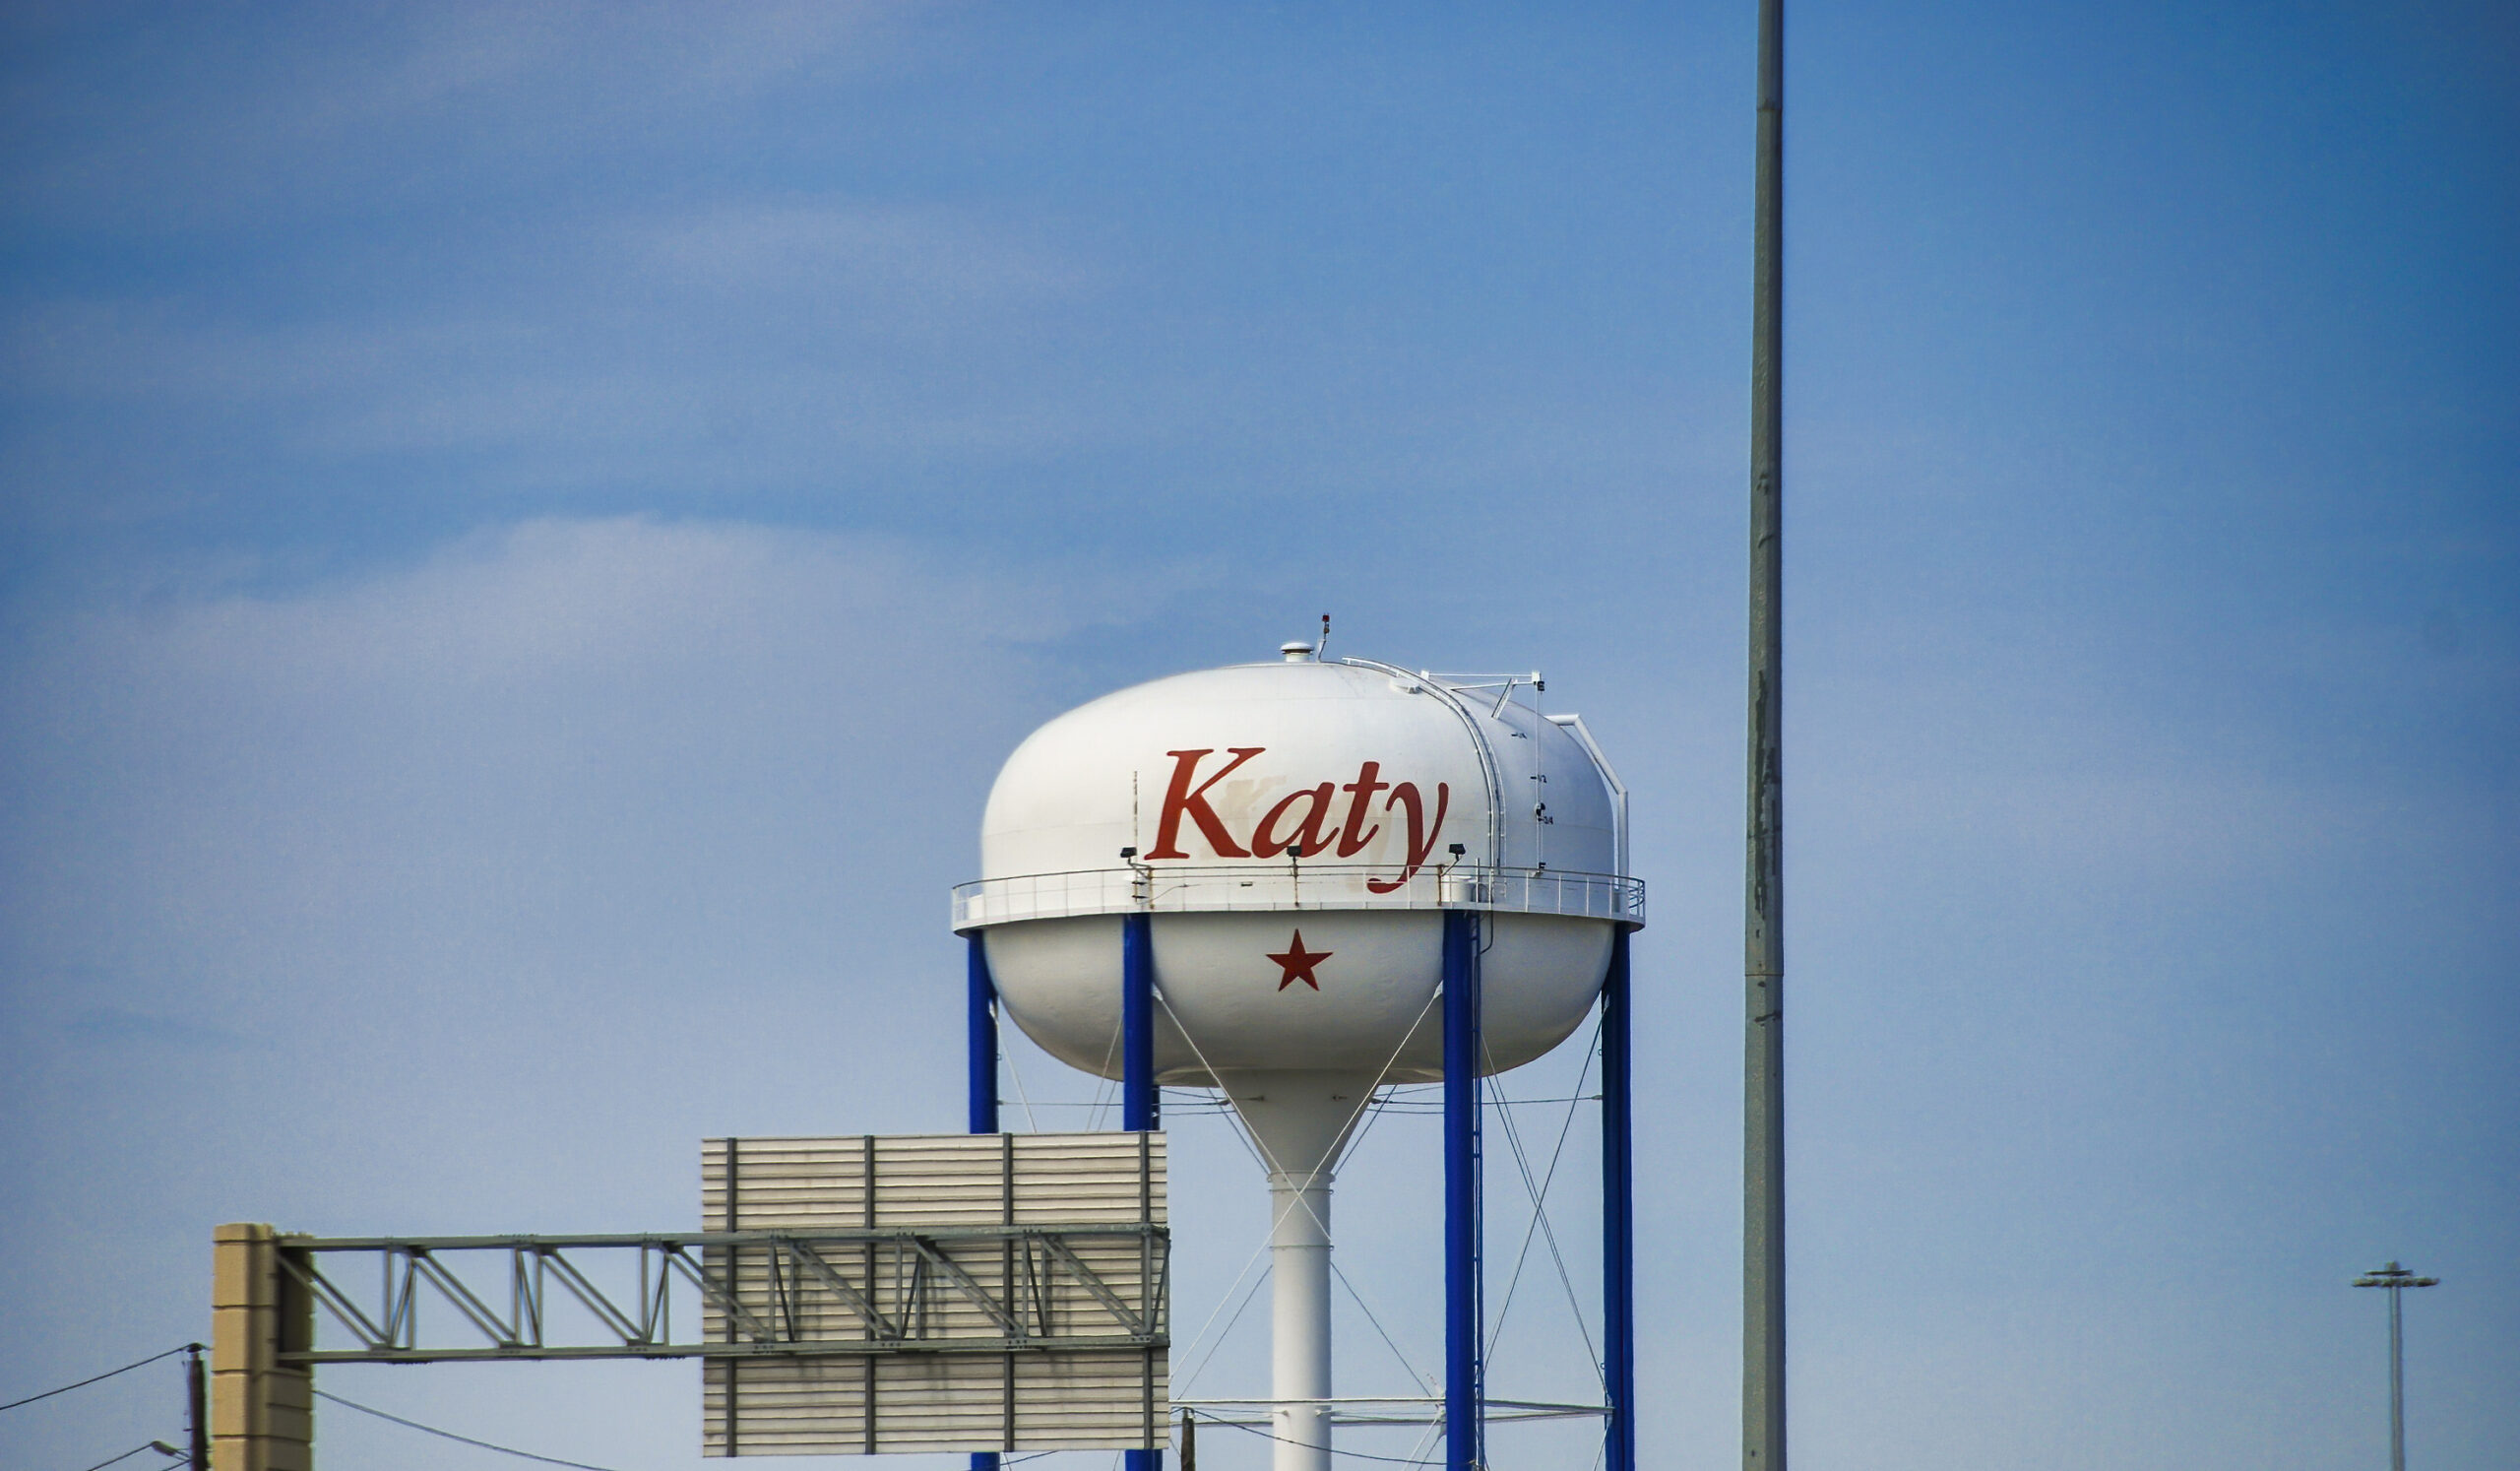 Katy welcome sign on a tower, Texas